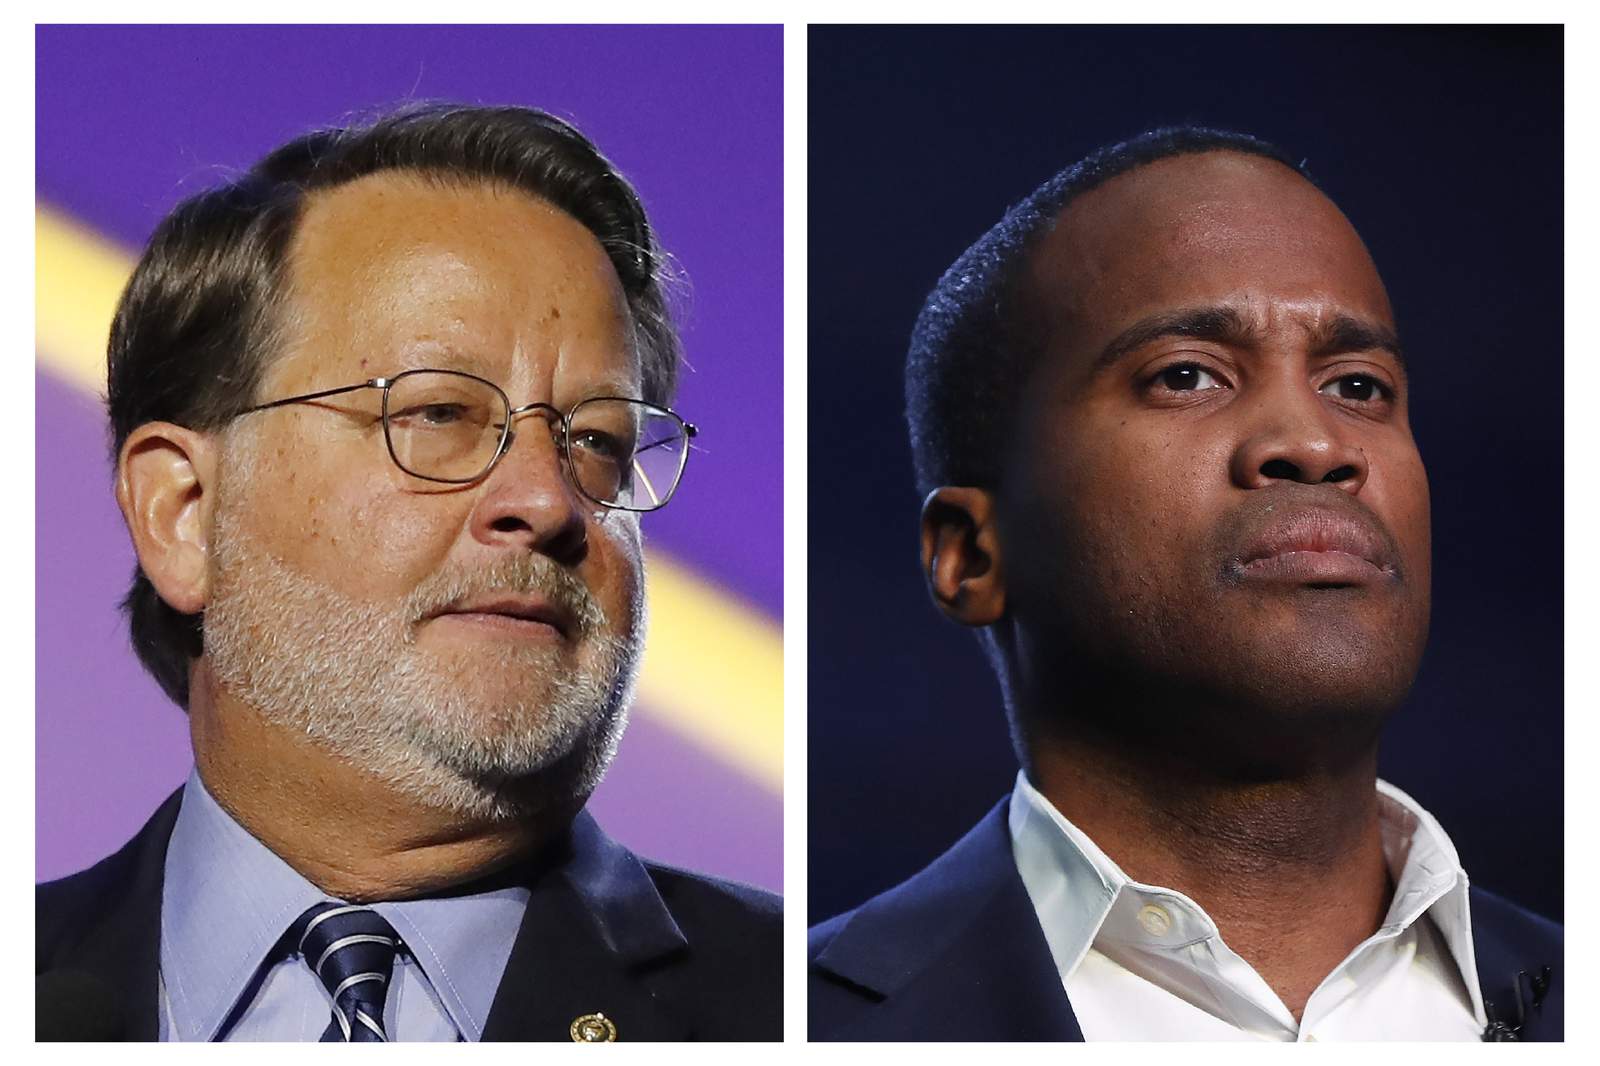 LIVE STREAM: Peters, James in Detroit Regional Chamber senate town hall